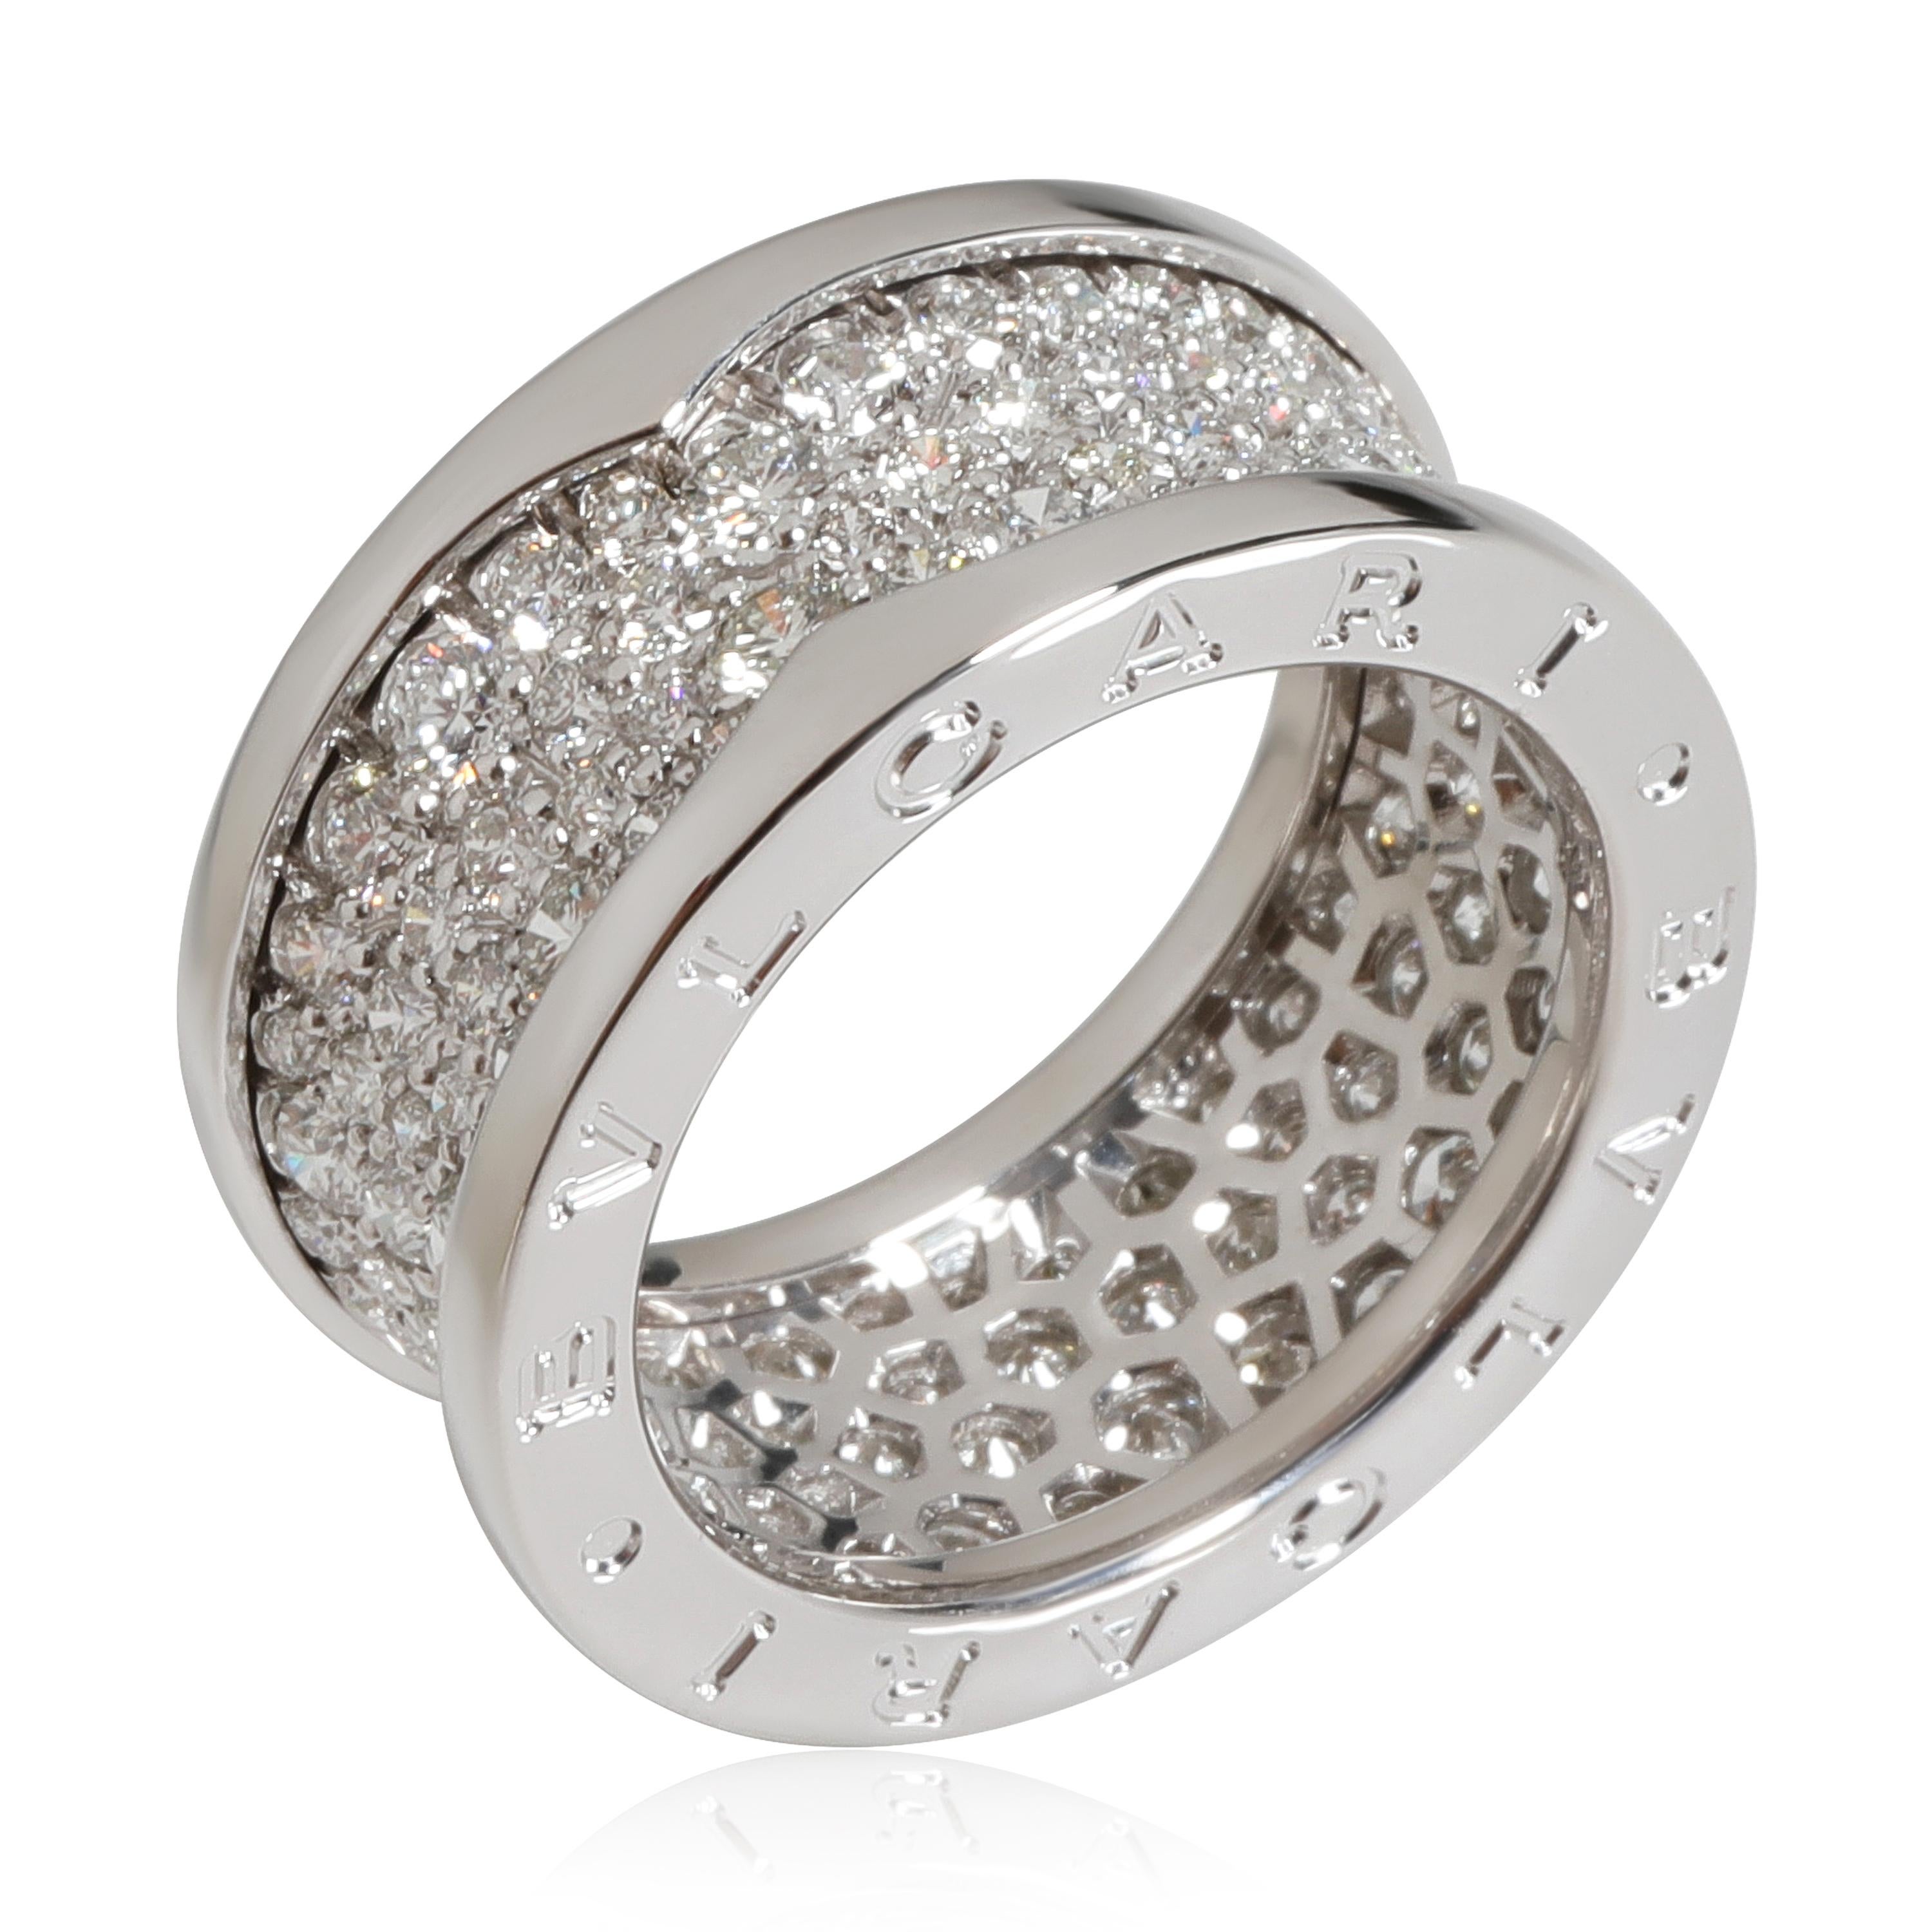 Bulgari B Zero1 Diamond  Ring in 18k White Gold 2.12 CTW

PRIMARY DETAILS
SKU: 117083
Listing Title: Bulgari B Zero1 Diamond  Ring in 18k White Gold 2.12 CTW
Condition Description: Retails for 20,000 USD. In excellent condition and recently